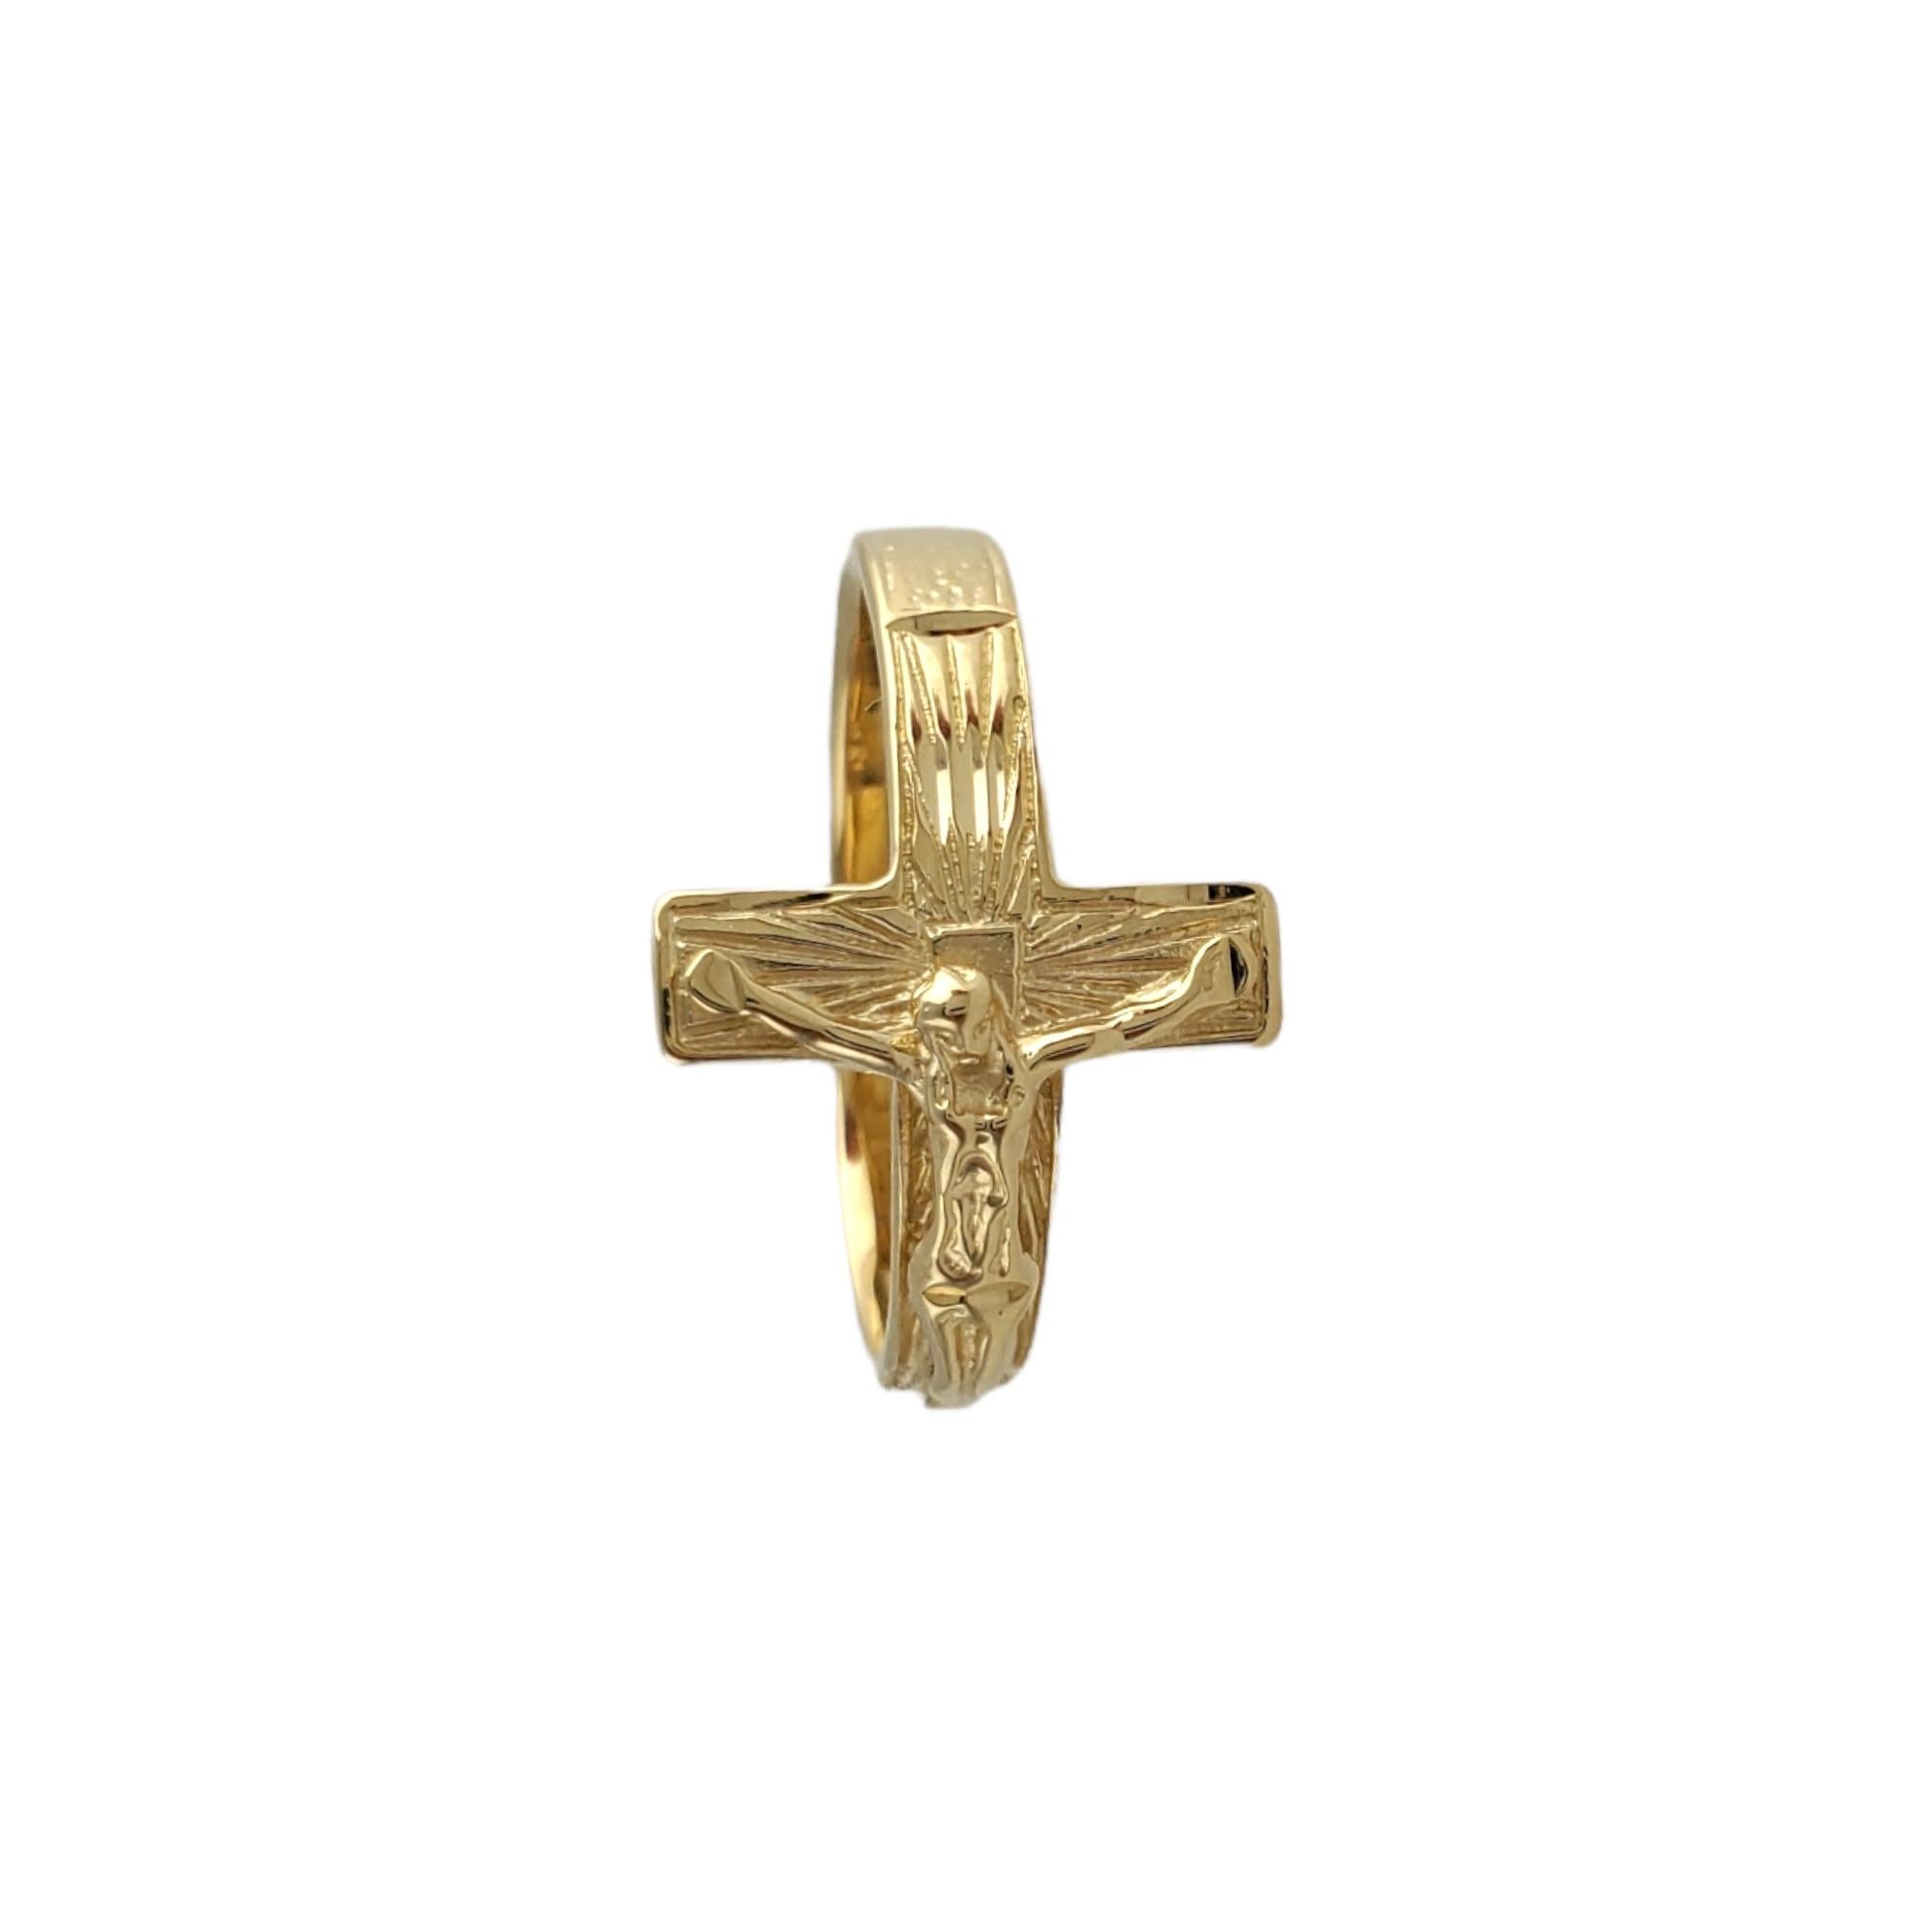 14K Yellow Gold Crucifix Ring 

You'll love this beautiful crucifix ring!

Size: 3.43mm X 21.08mm

Weight: 3.1 gr / 1.9 dwt

Hallmark: MC. 14K 

Very good condition, professionally polished.

Will come packaged in a gift box and will be shipped U.S.